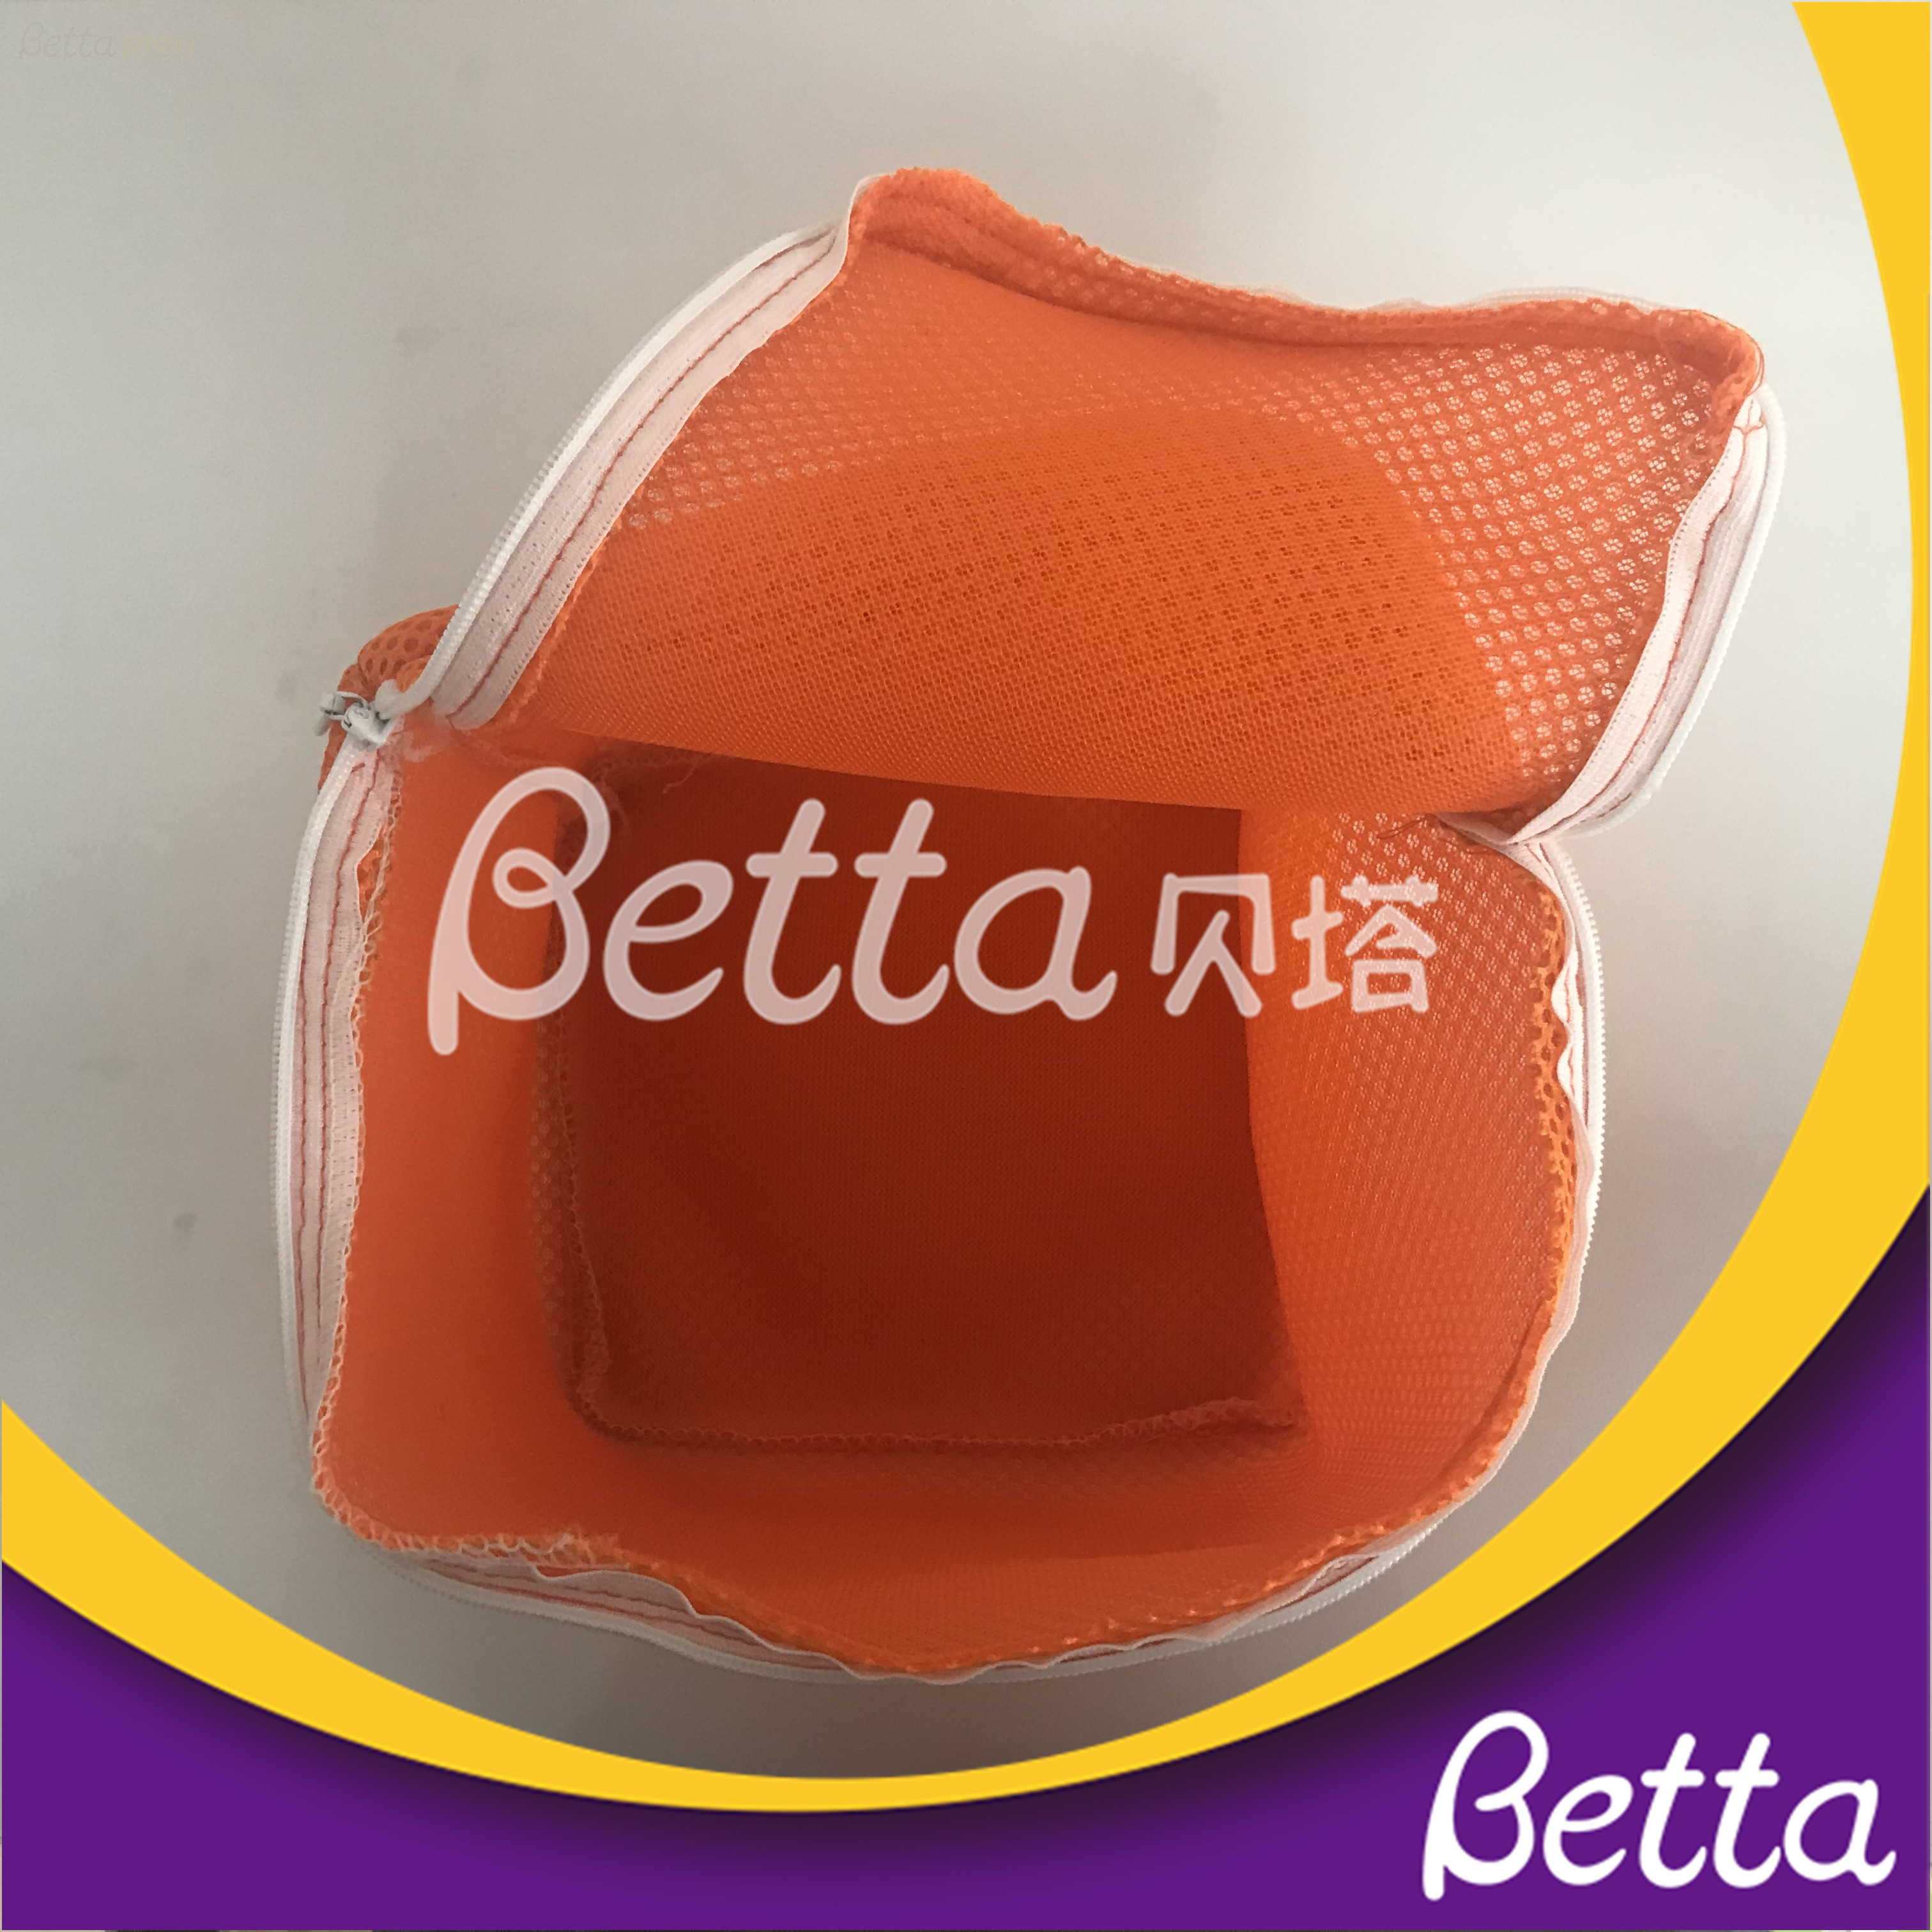 Bettaplay Foam Pit Cover for Kids Indoor Outdoor Playground